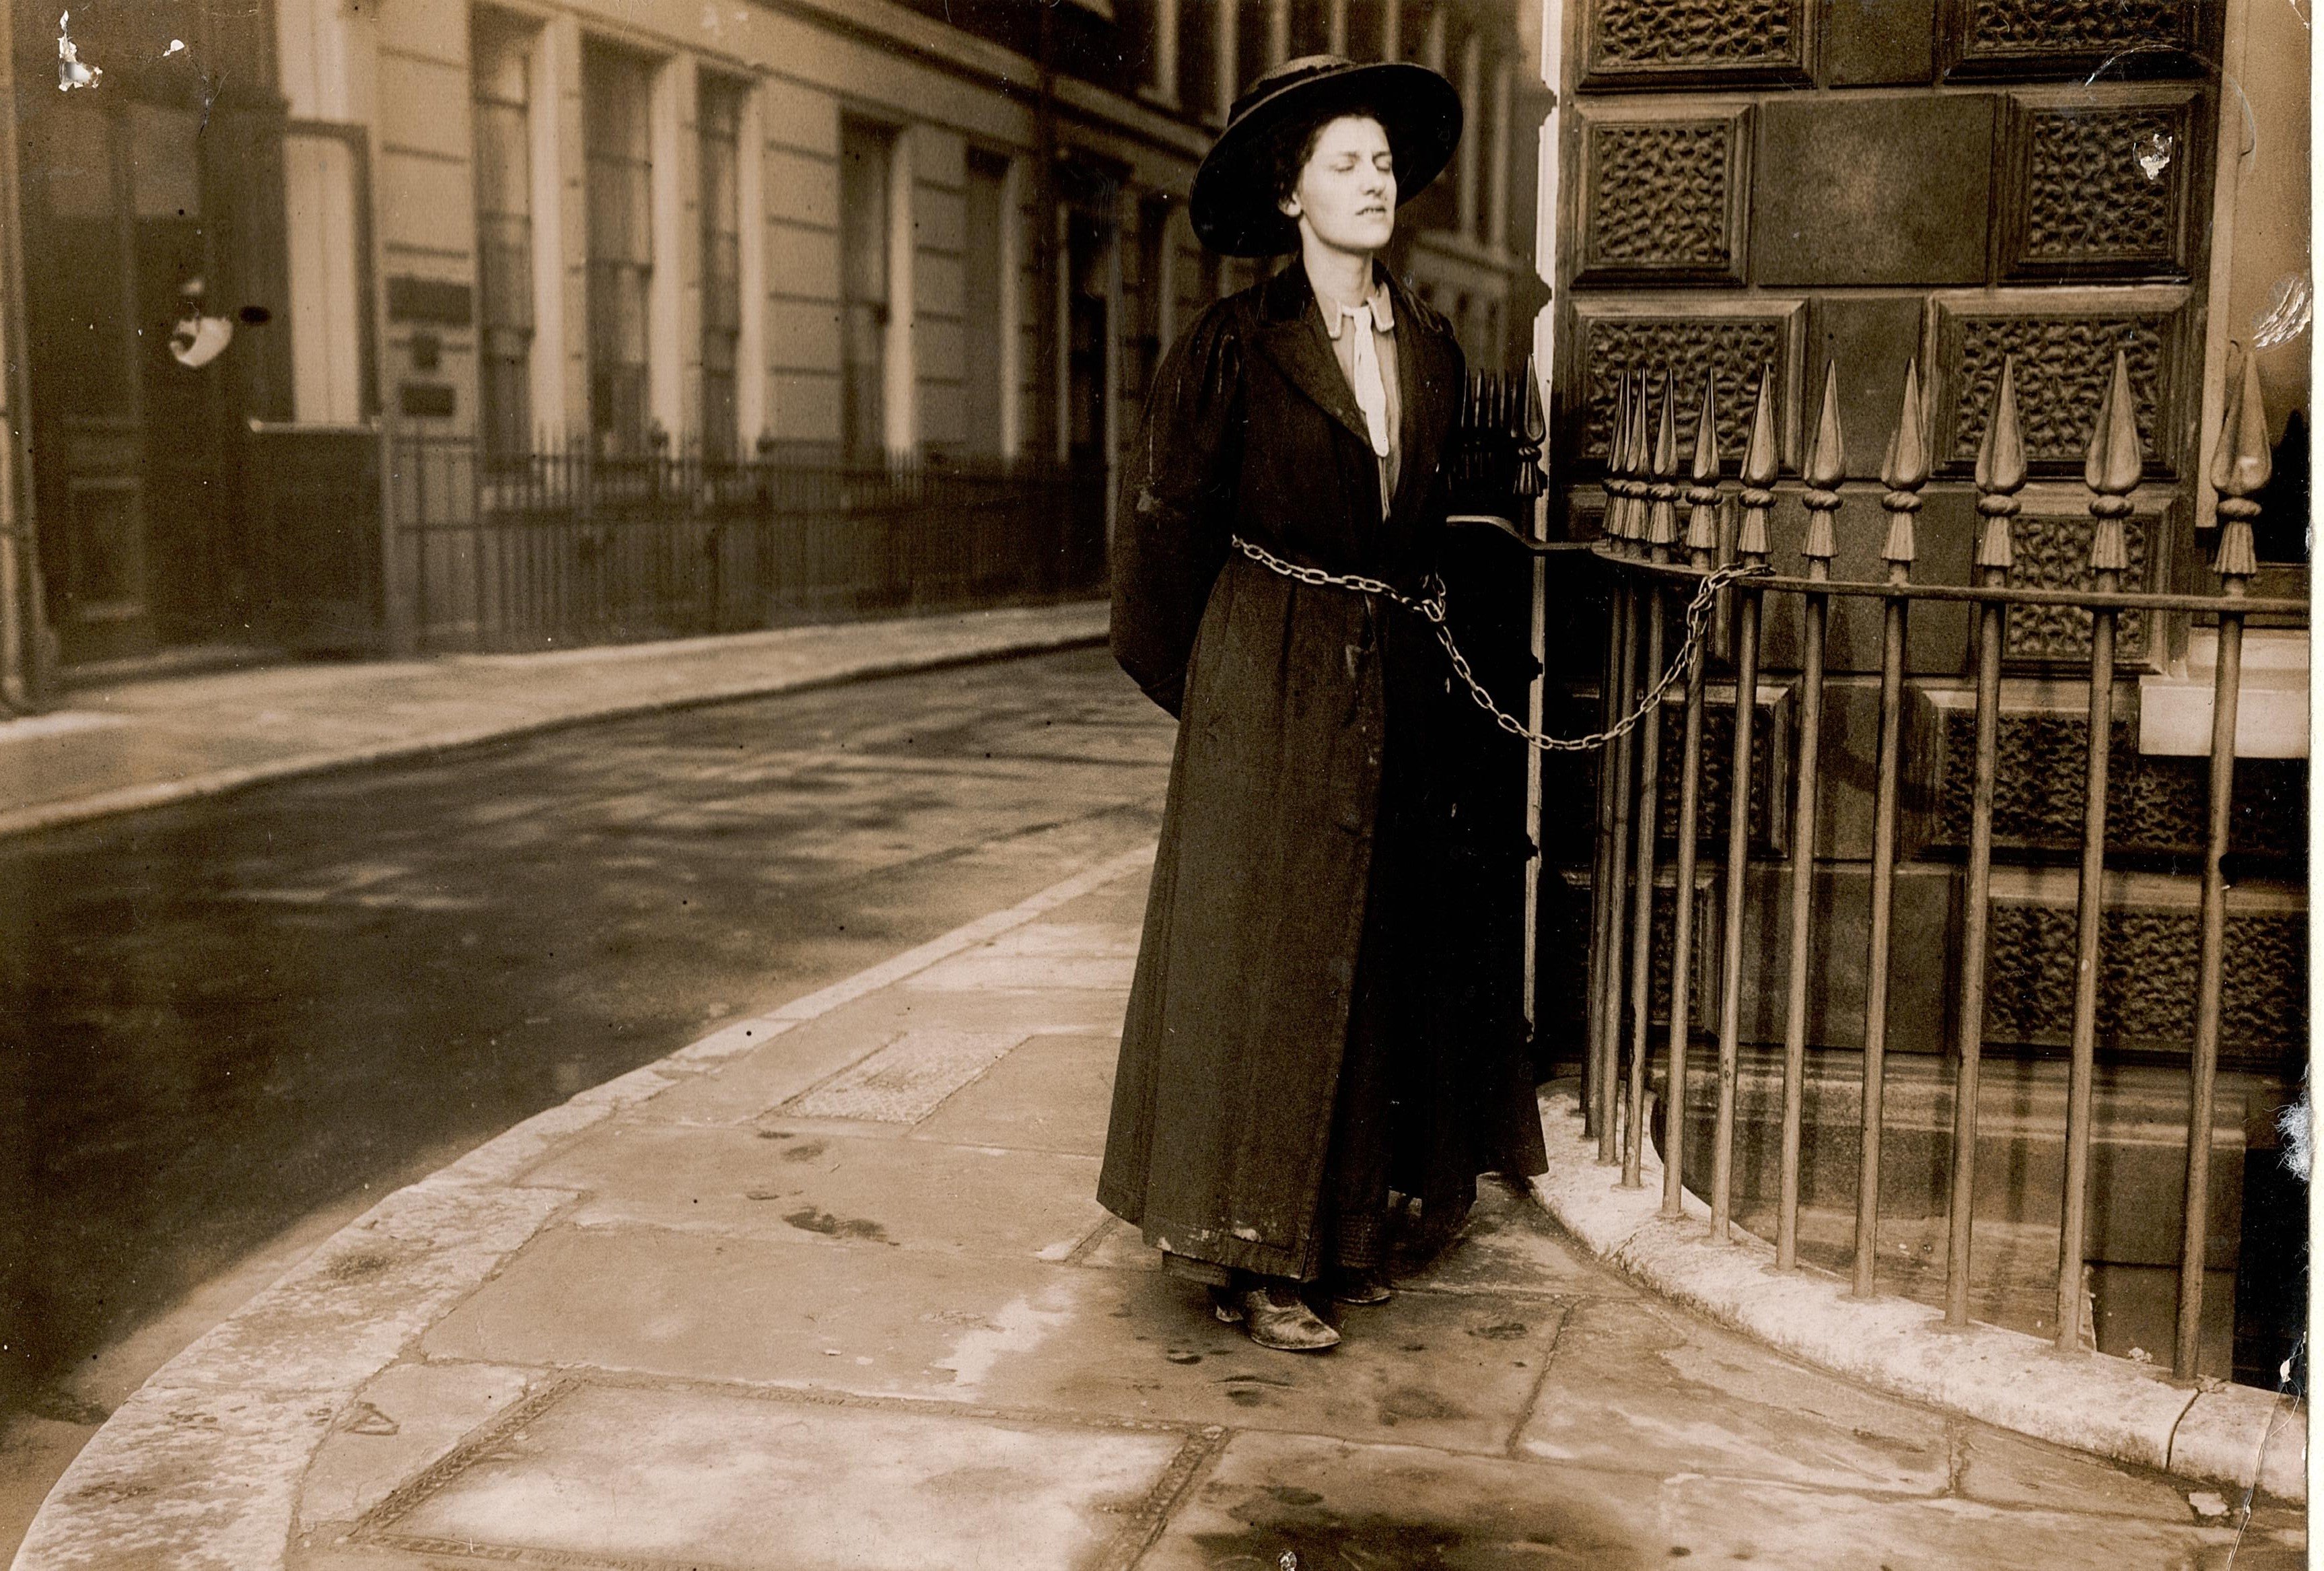 Photograph of a suffragette chained to a railing